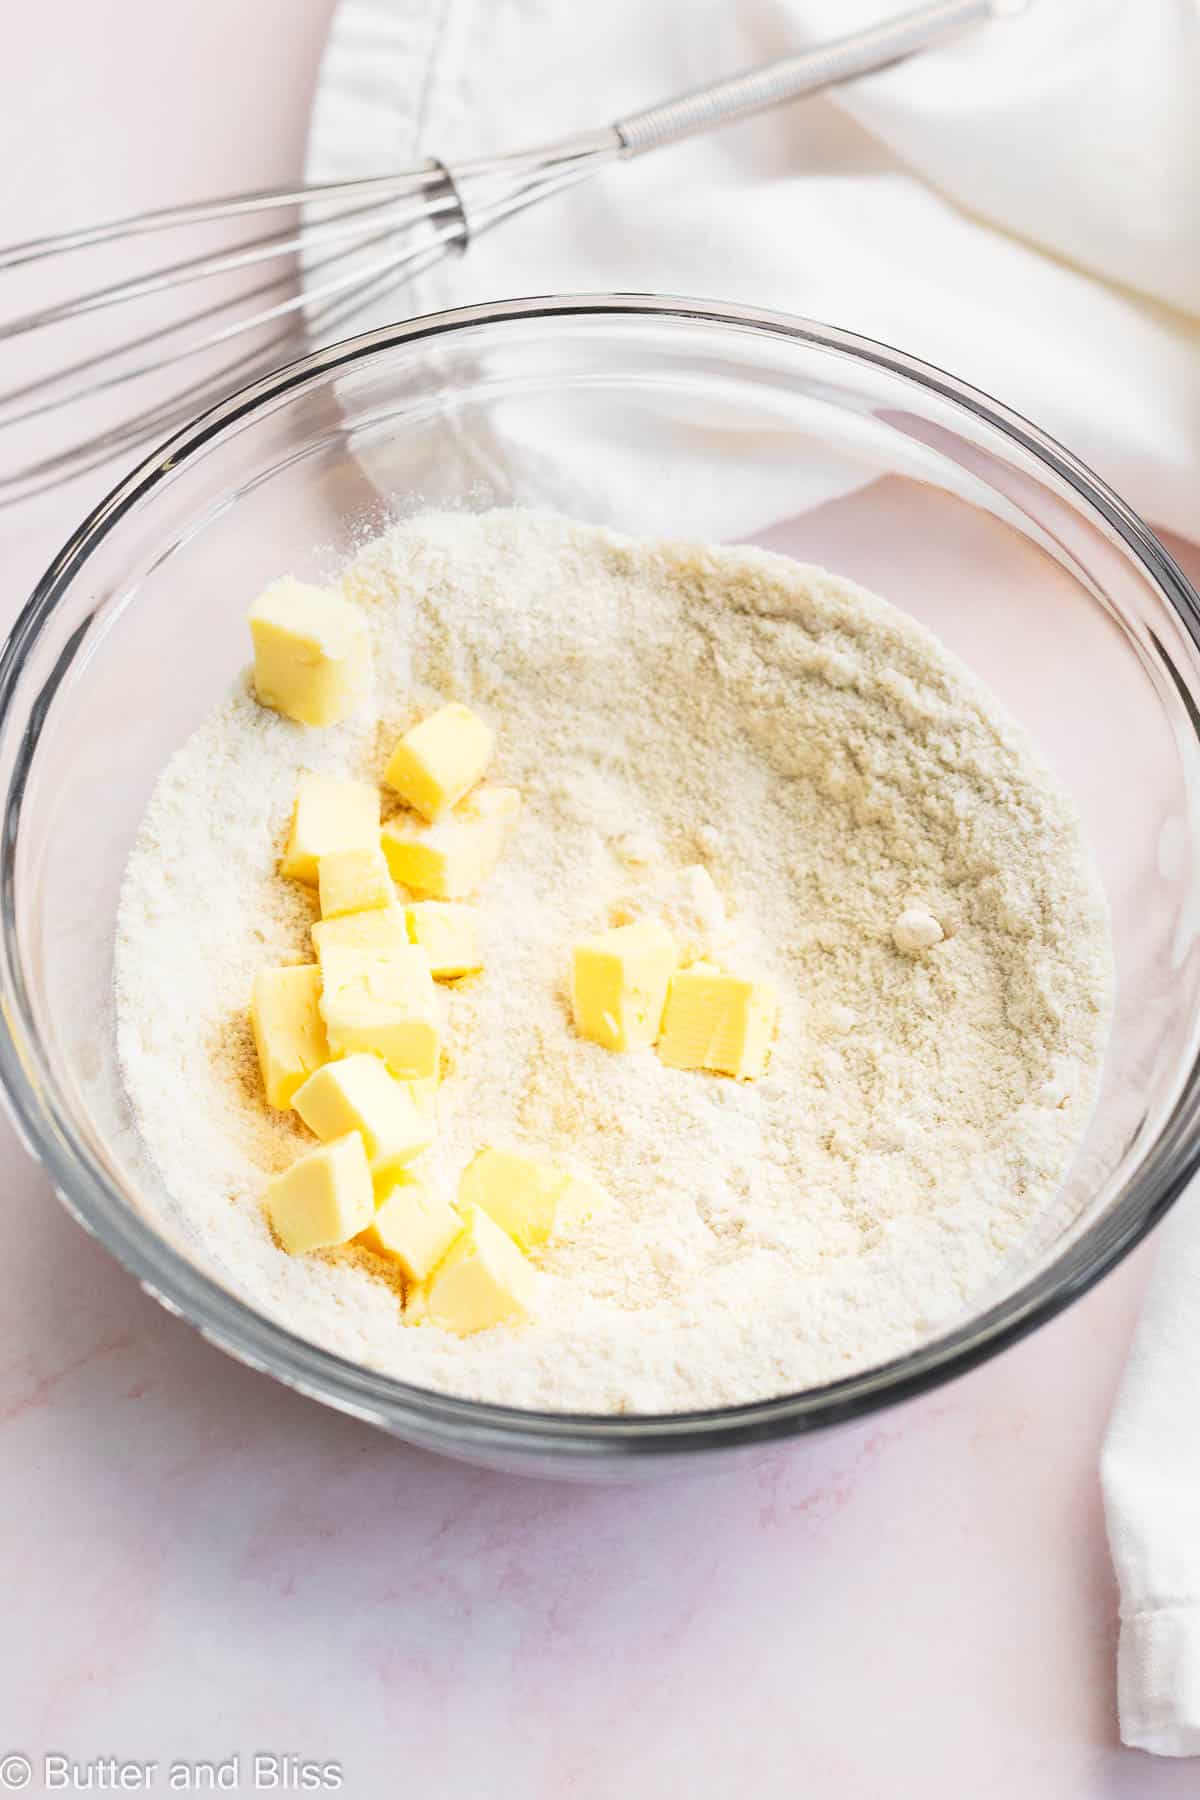 Butter tossed on dry ingredients in a mixing bowl.